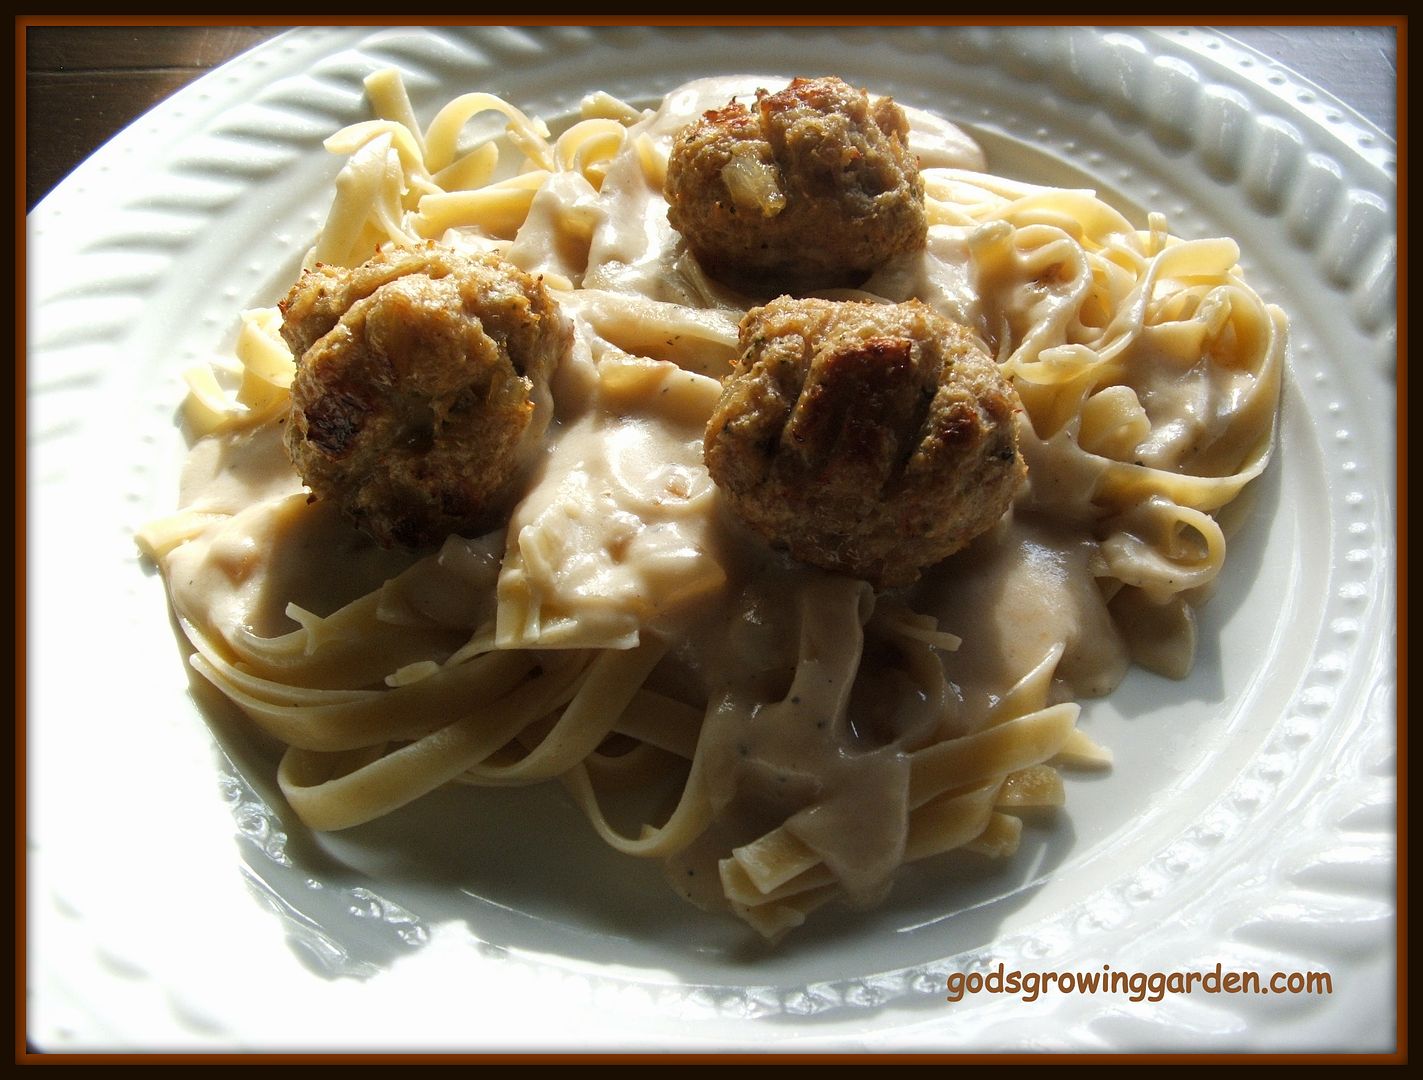 Caramelized Onion Chicken Meatballs by Angie Ouellette-Tower for godsgrowinggarden.com photo 014_zpsda010a98.jpg